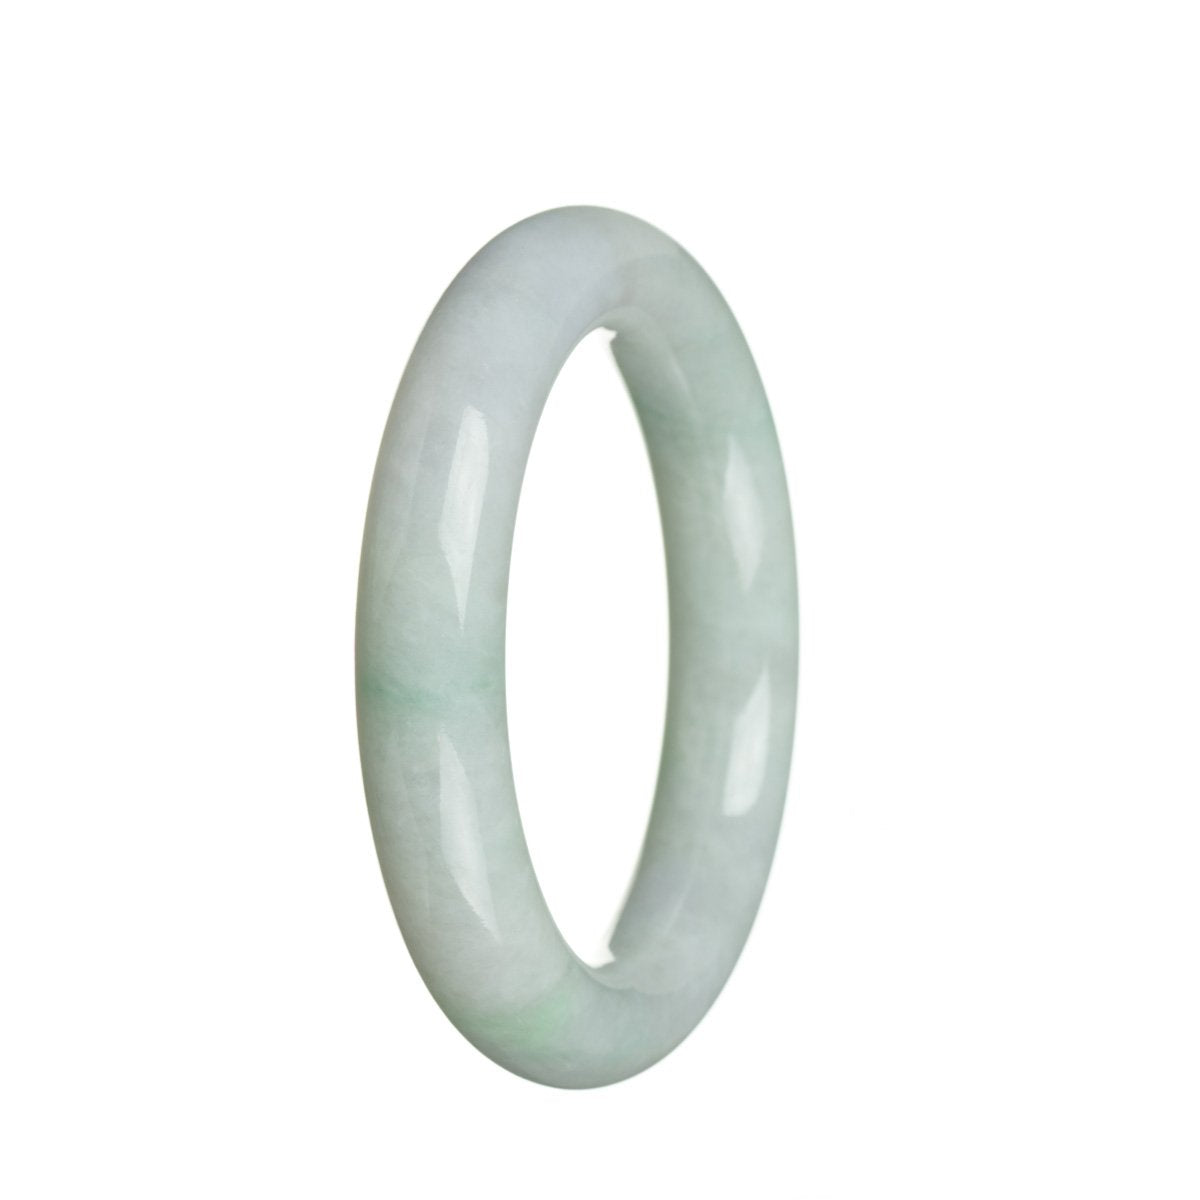 A round bangle made of high-quality green Burma jade, measuring 56mm in diameter.